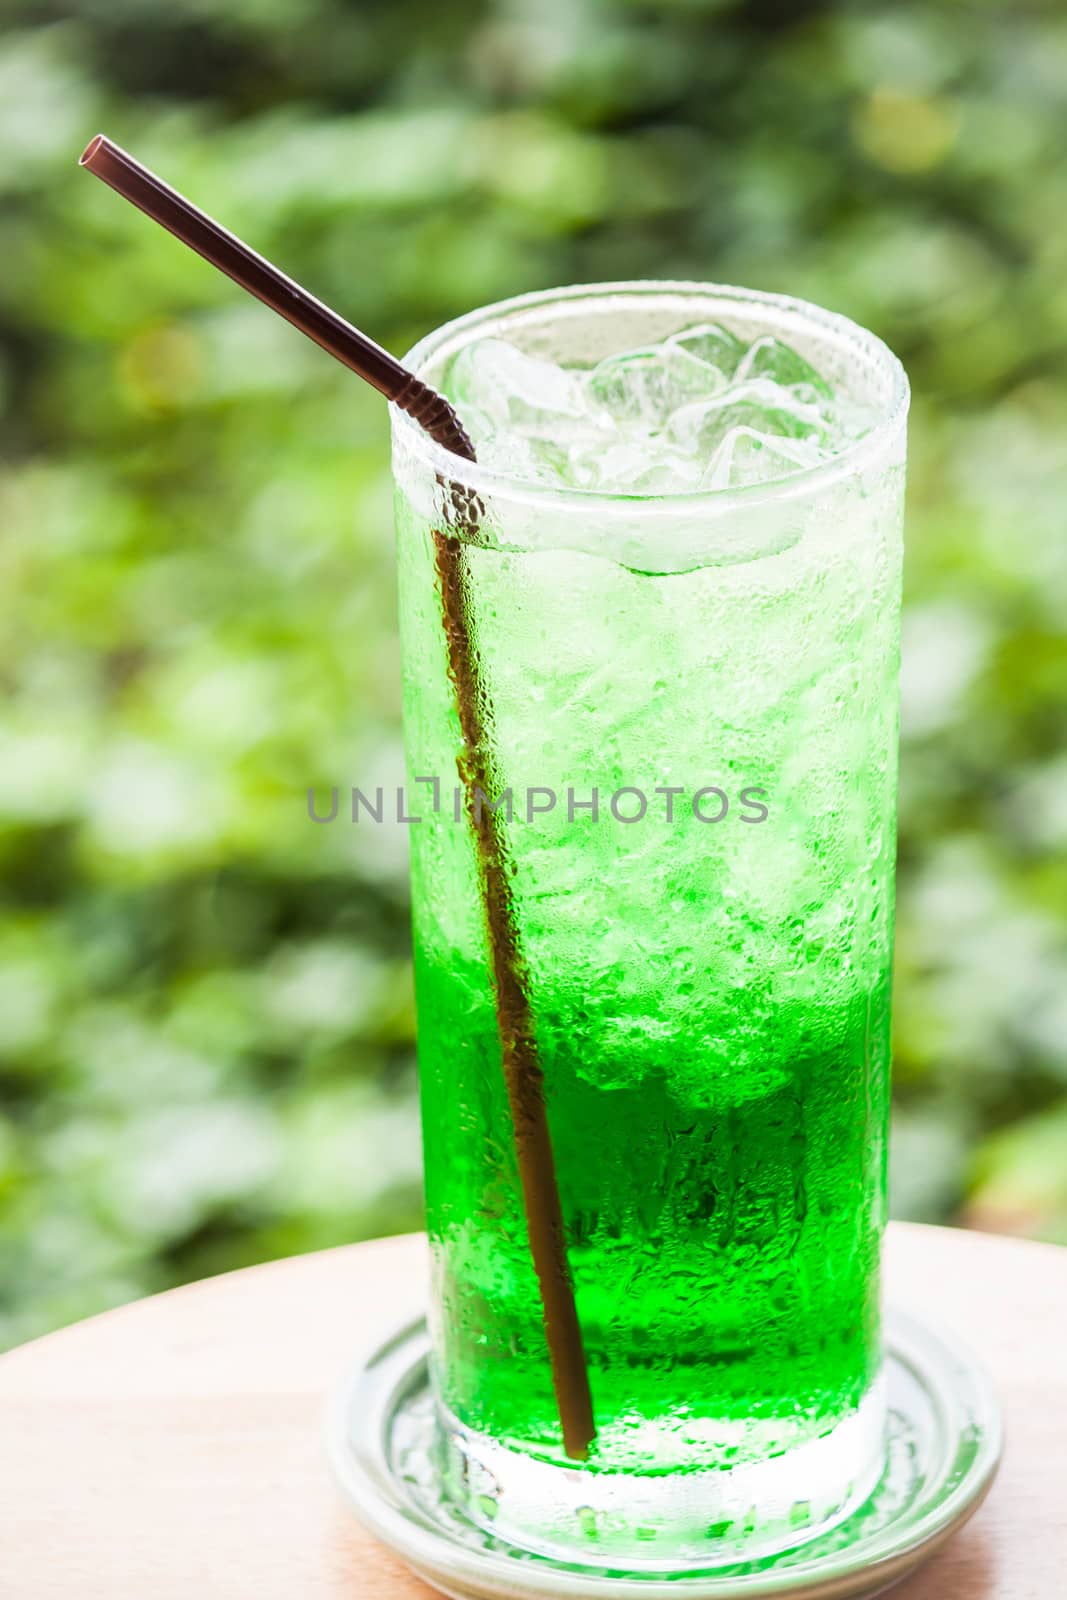 Fresh sweet green drink with ice cubes by punsayaporn